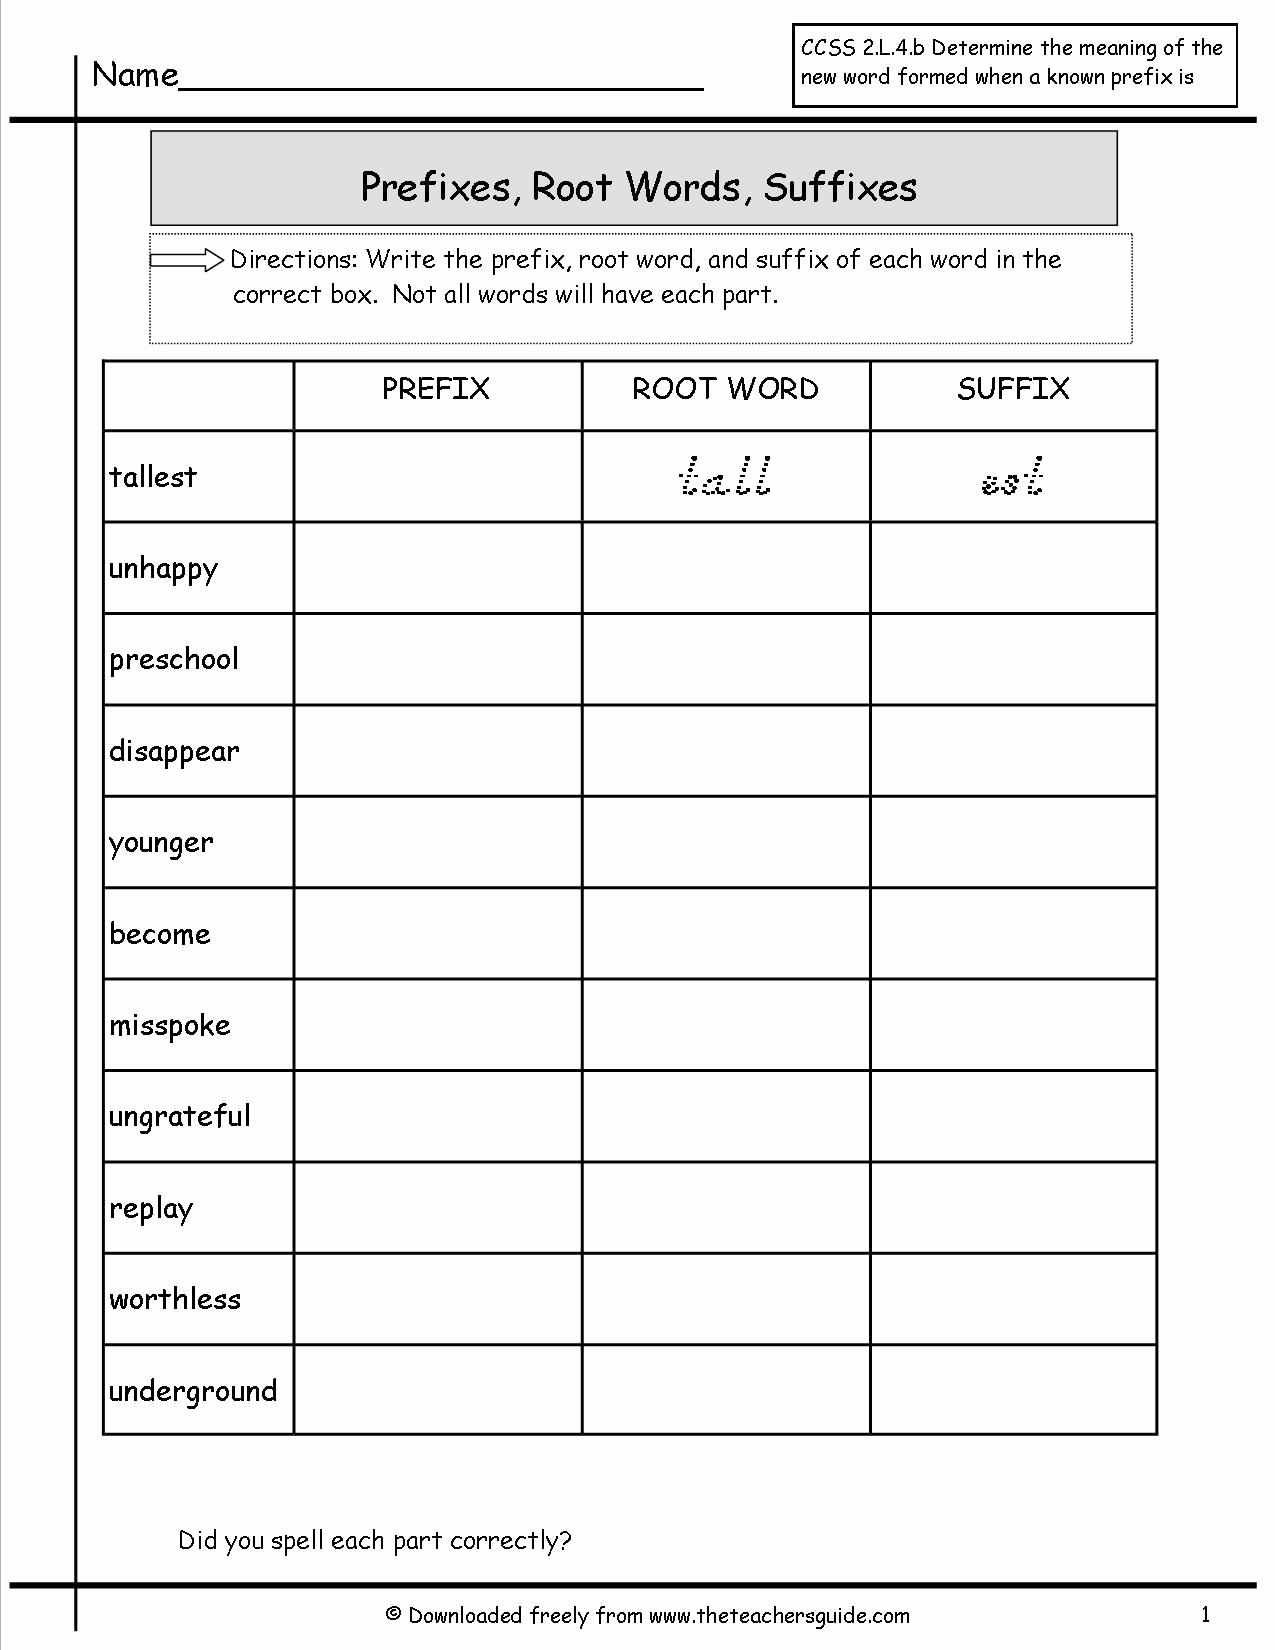 Suffix Worksheets 4th Grade Best Of 20 Suffix Worksheets for 4th Grade